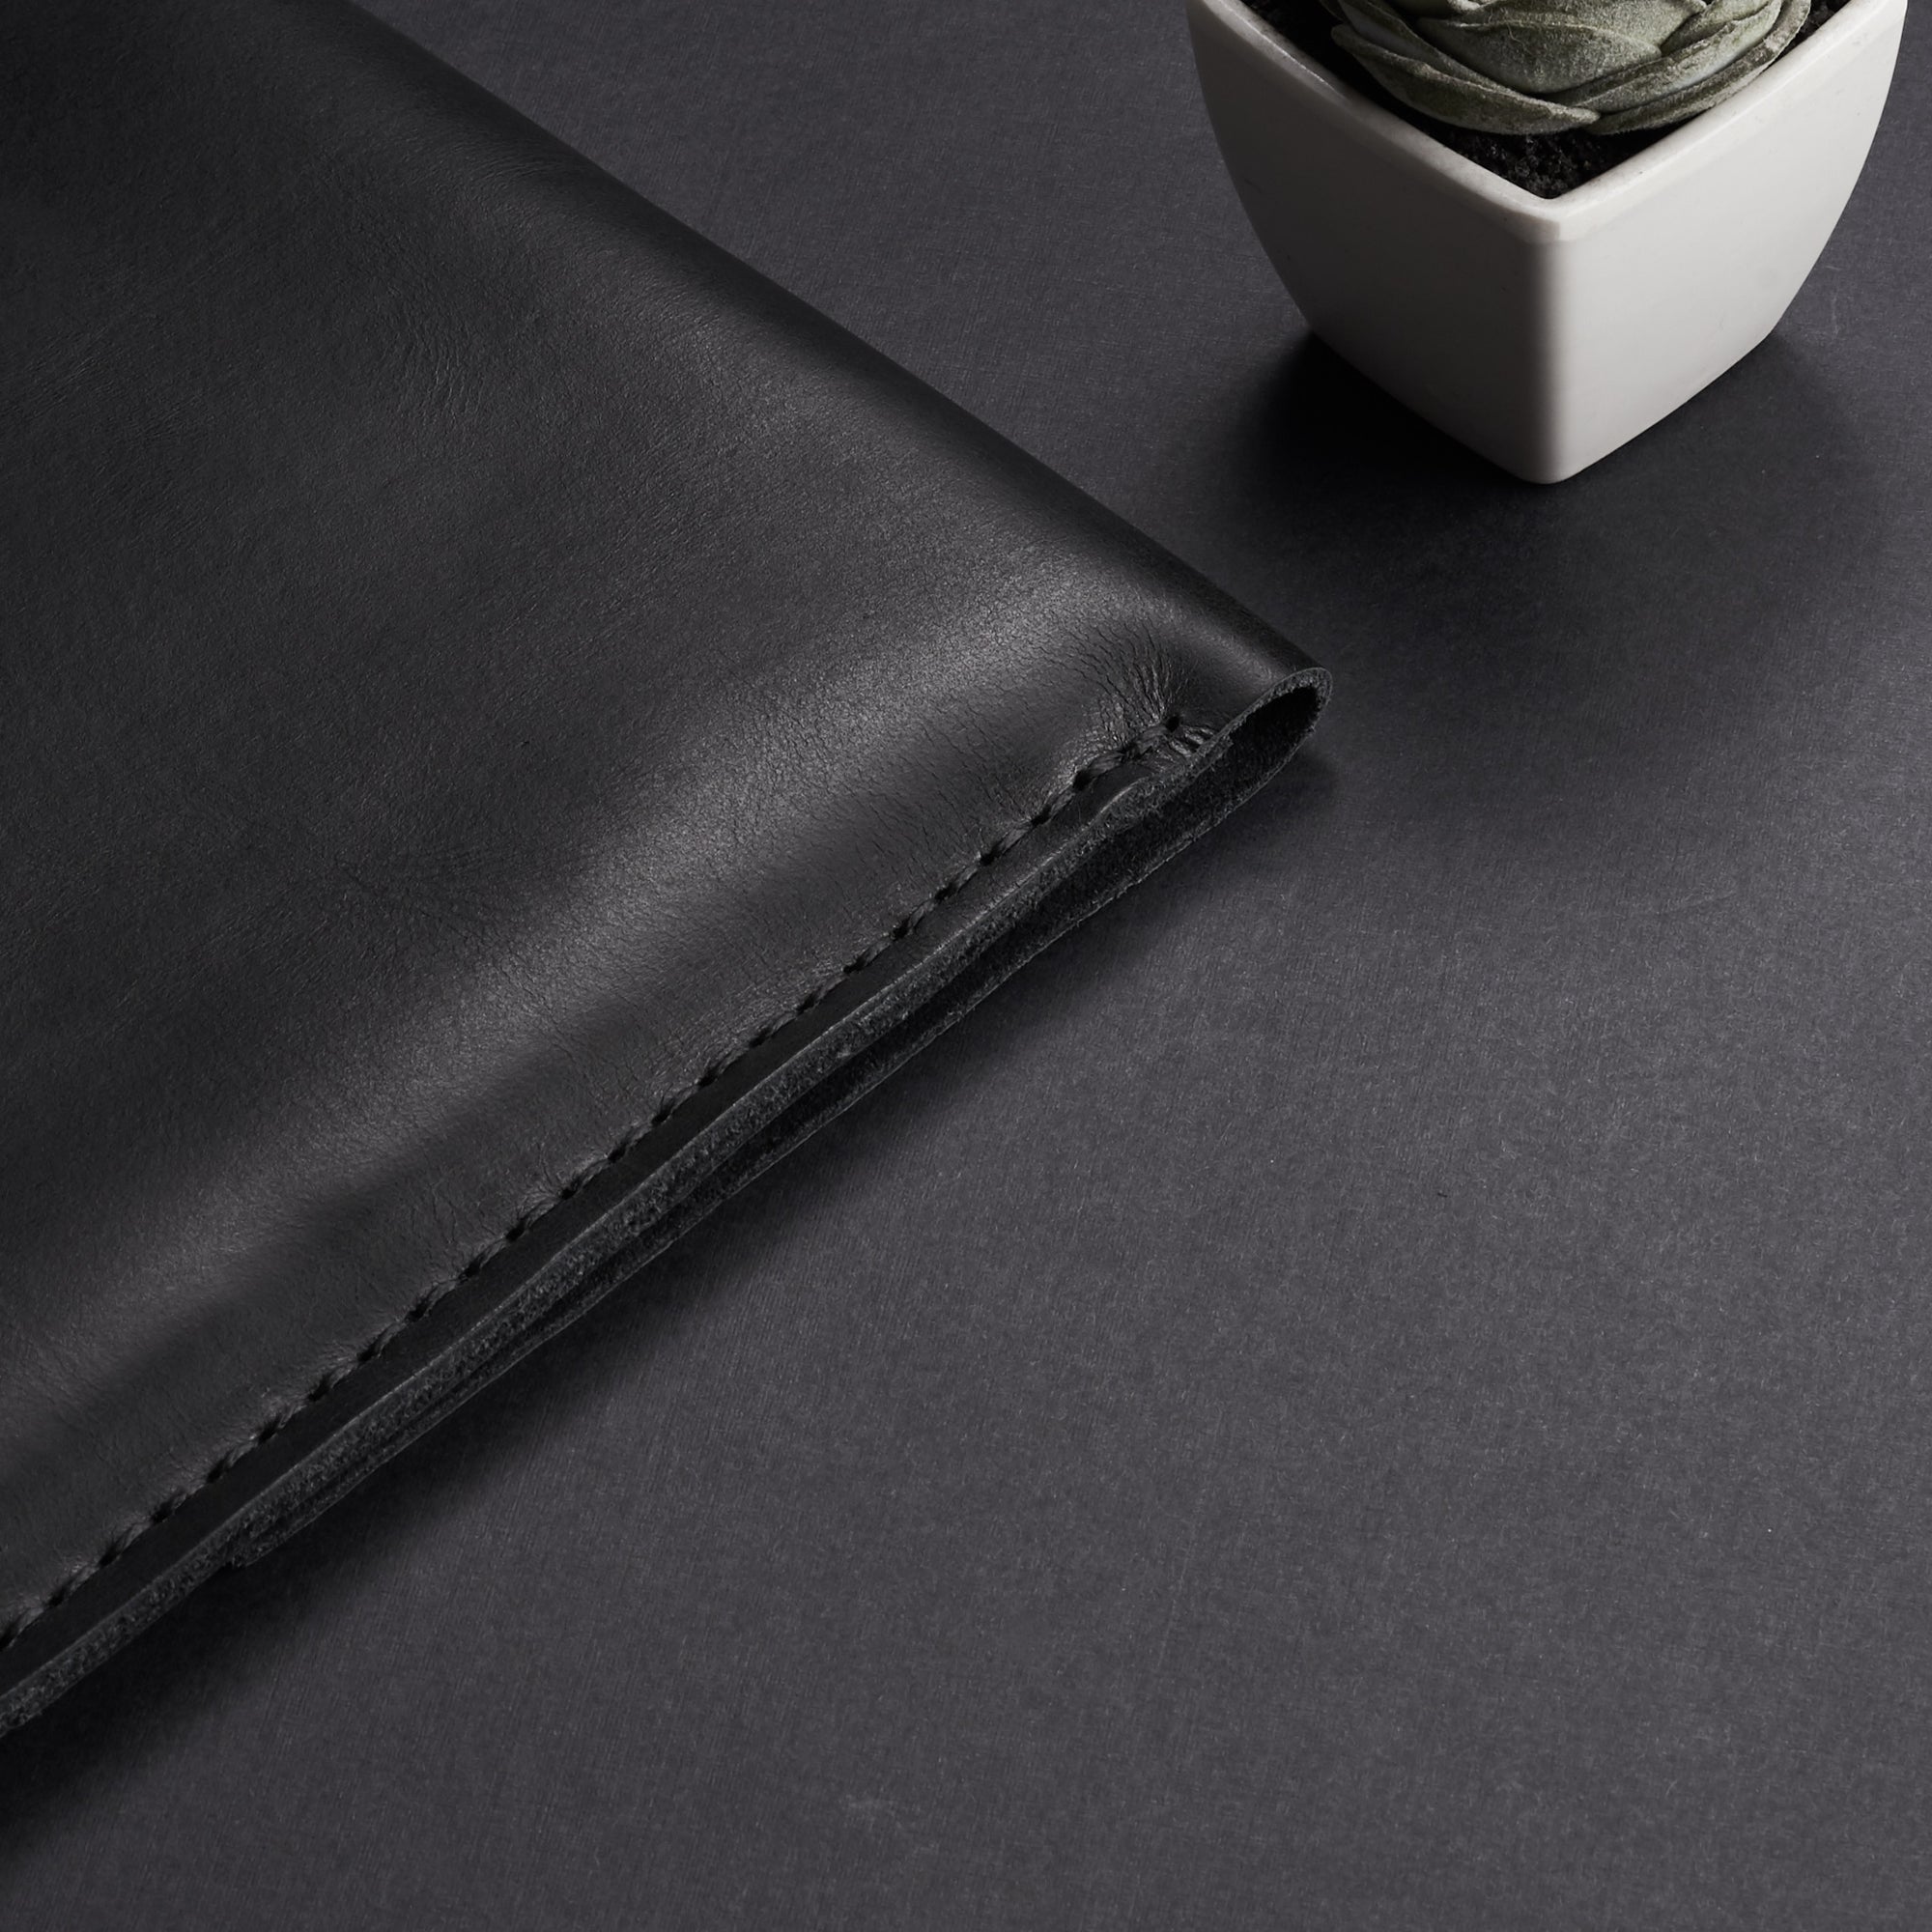 Hand stitched. Black Leather Minial iPad Sleeve Case by Capra Leather